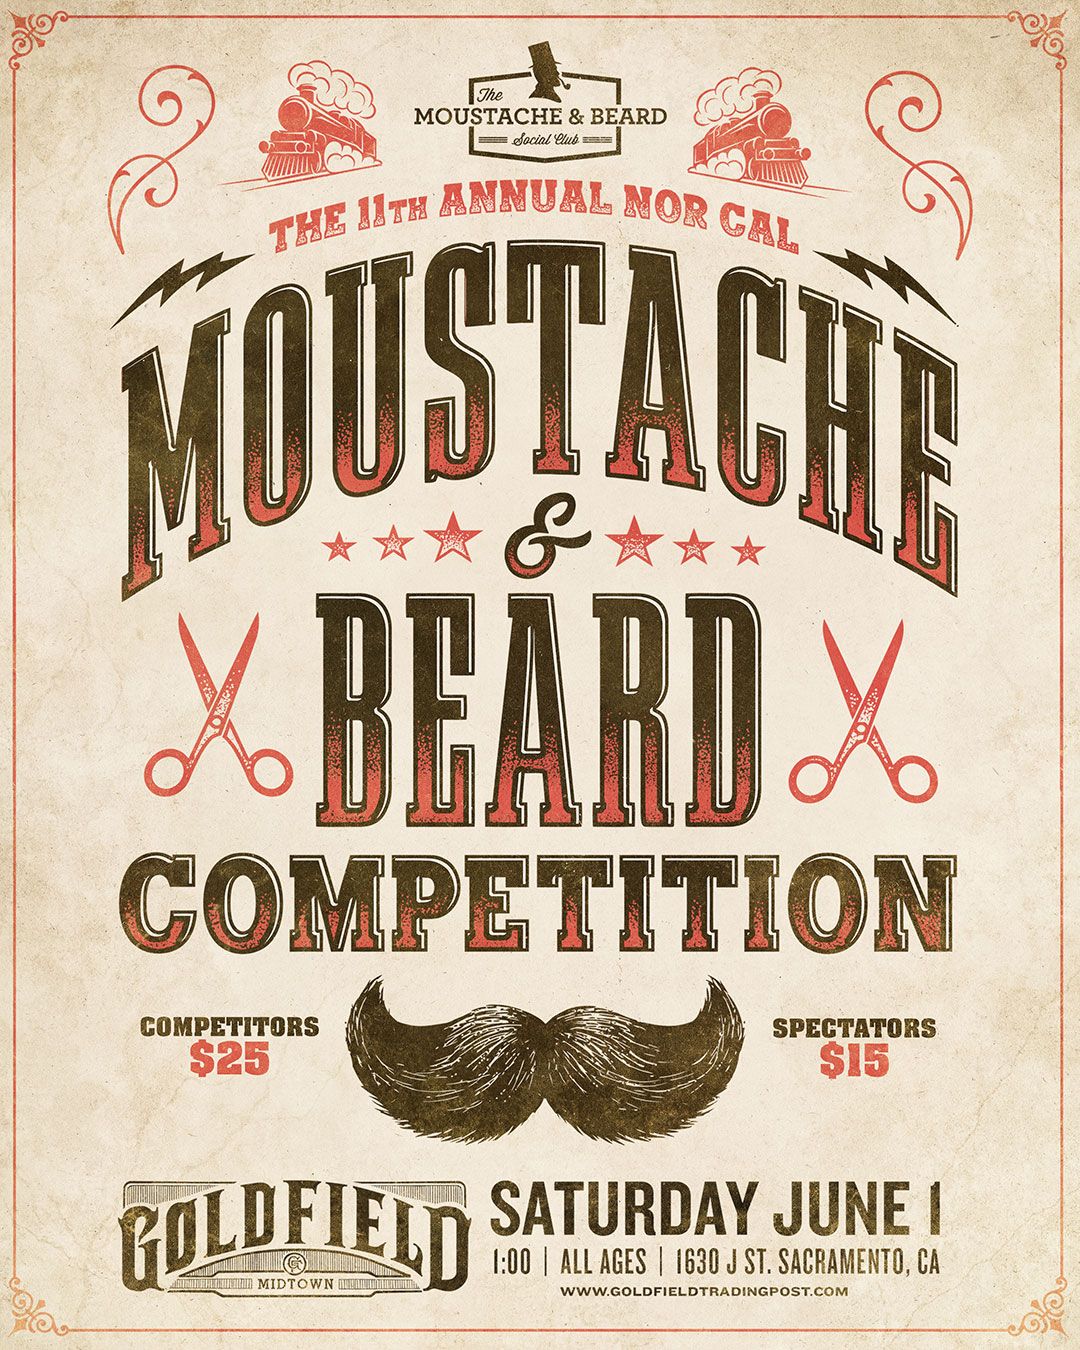 The 11th Annual Nor Cal Moustache & Beard Competition